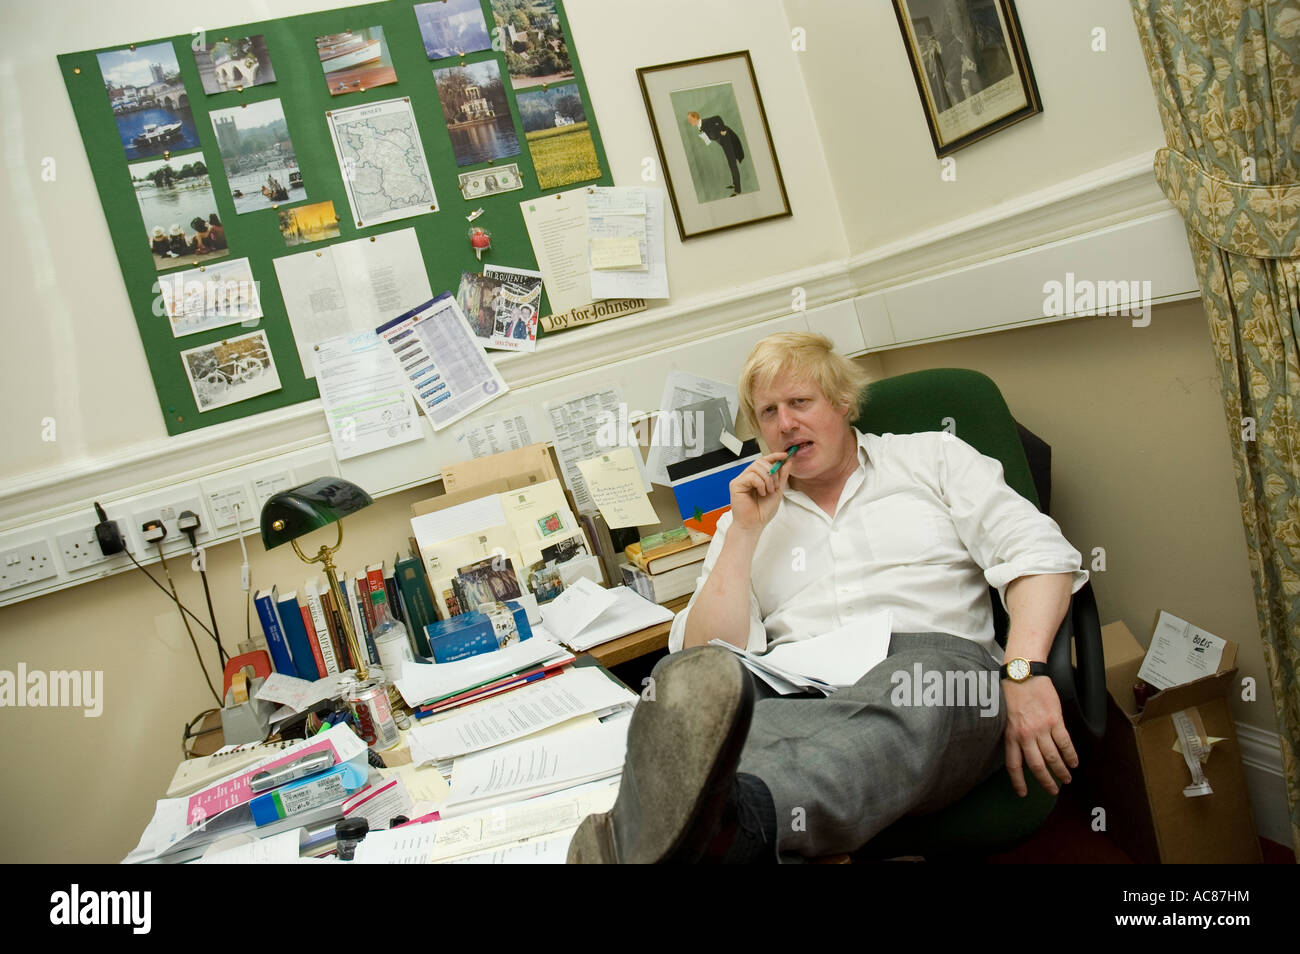 Boris Johnson, Conservative MP for Henley in his office in Portcullis House, London, England Stock Photo